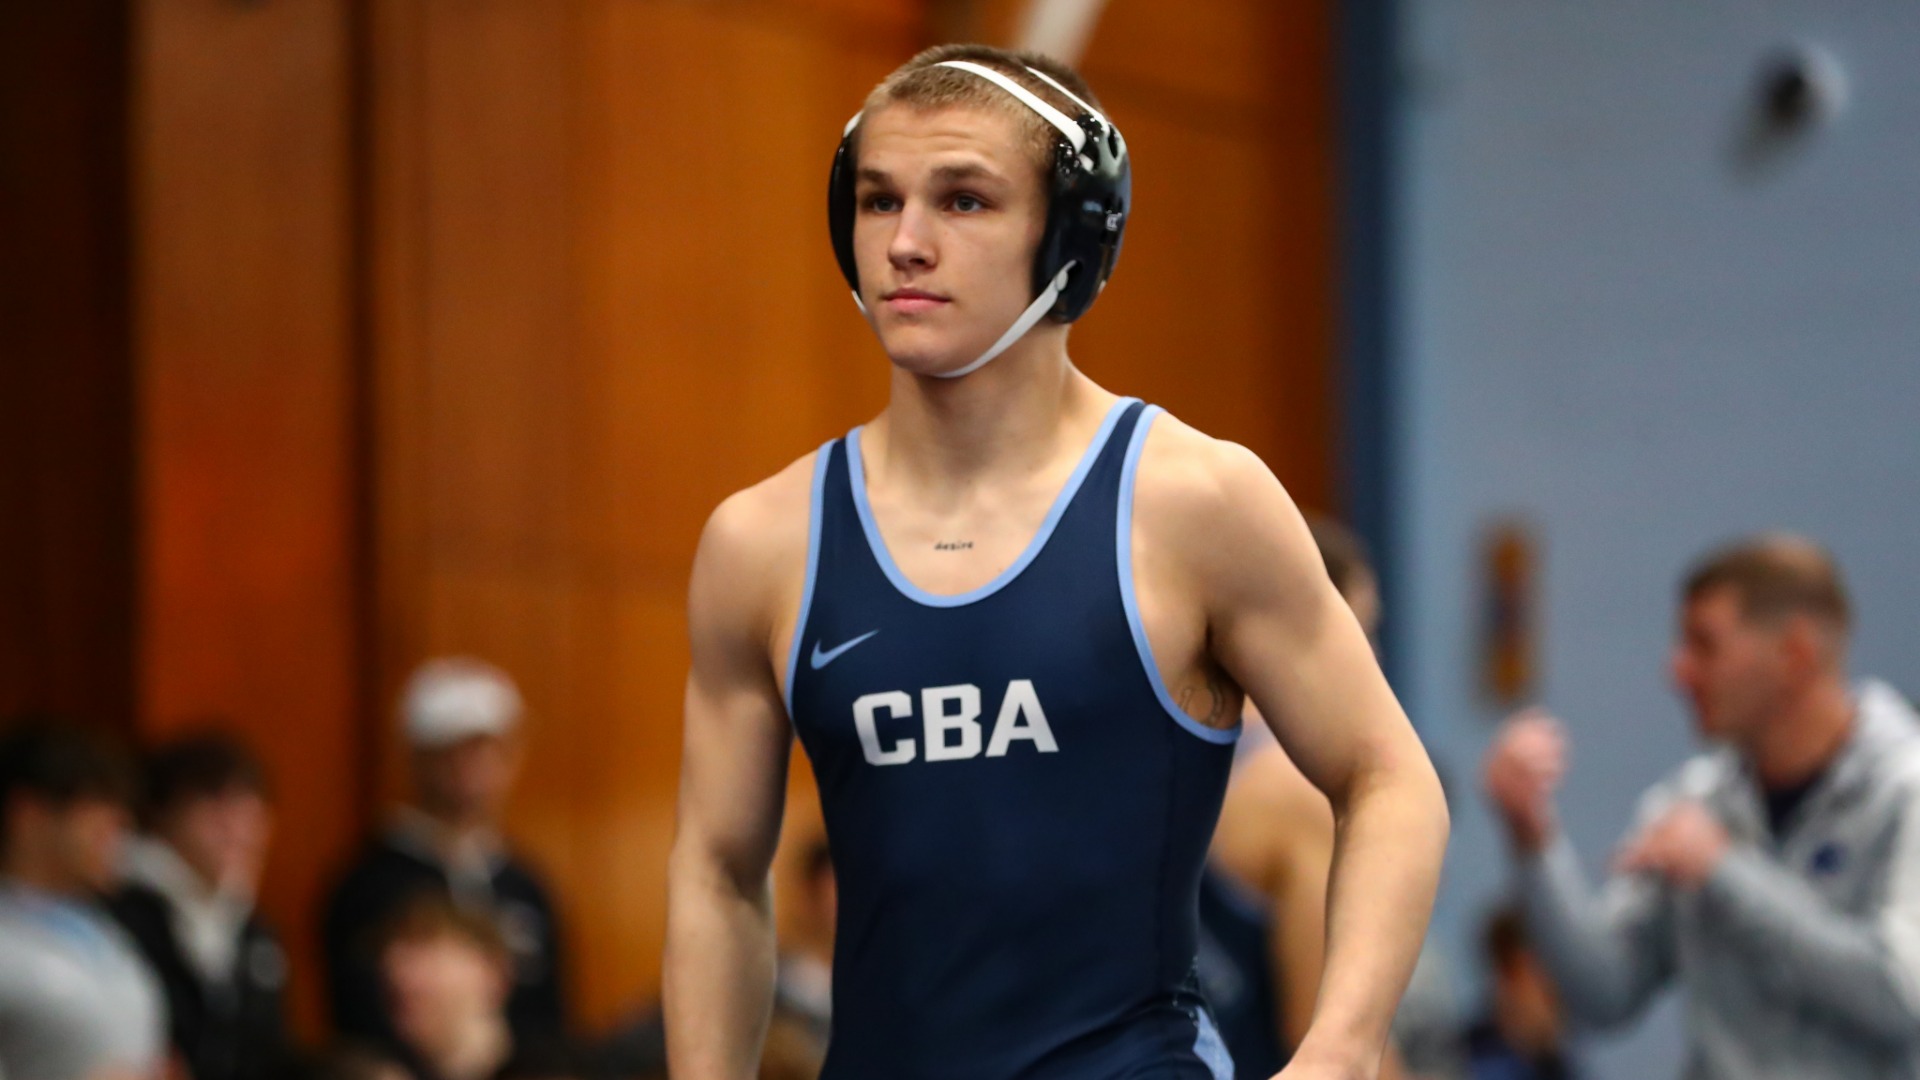 CBASlide 1 - CBA WINS DISTRICT AND REGION, FIVE WRESTLERS PLACE AT INDIVIDUAL STATES